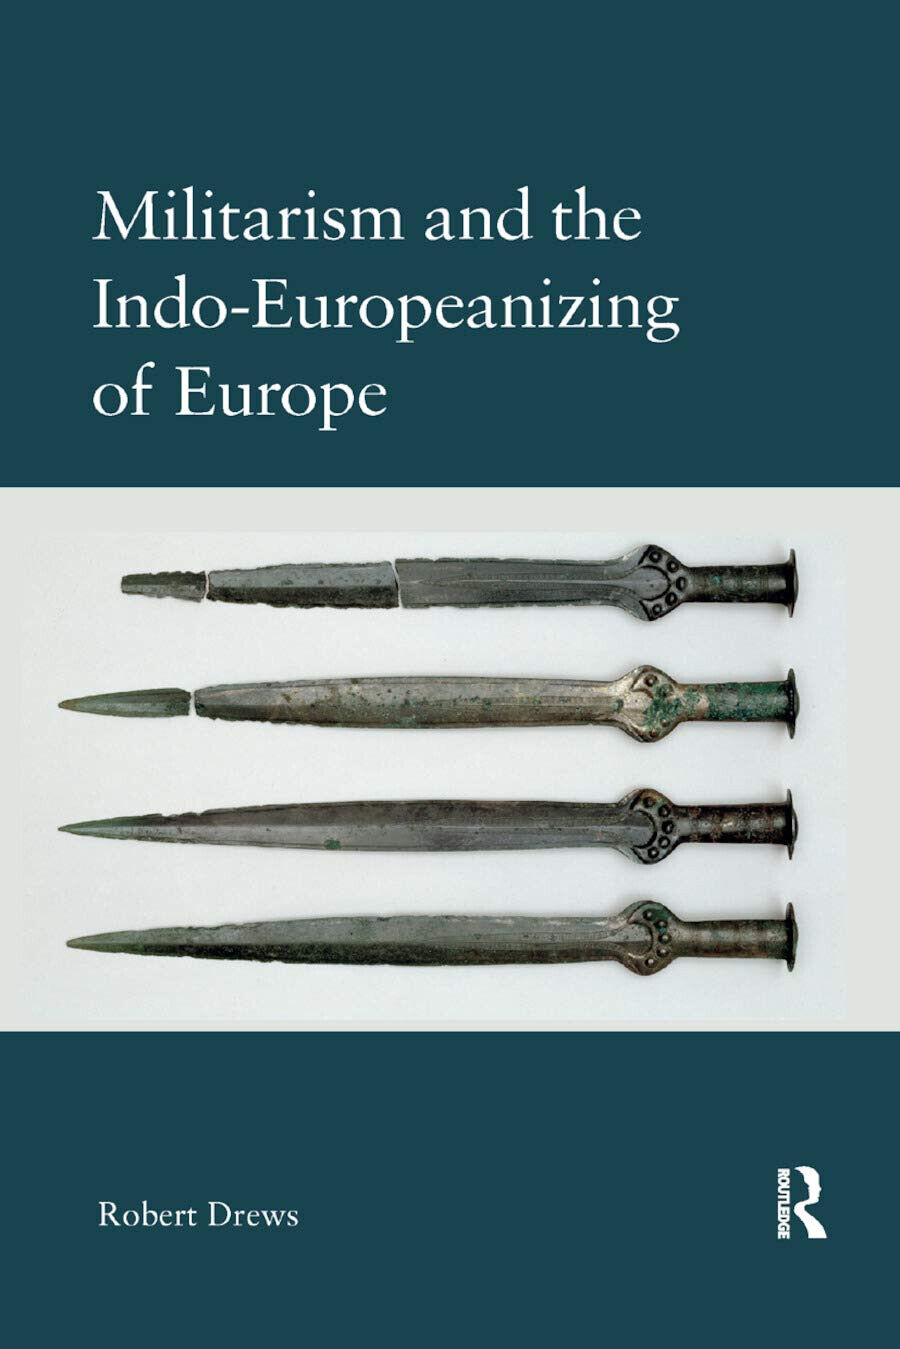 Militarism And The Indo-europeanizing Of Europe - Robert Drews - 2019